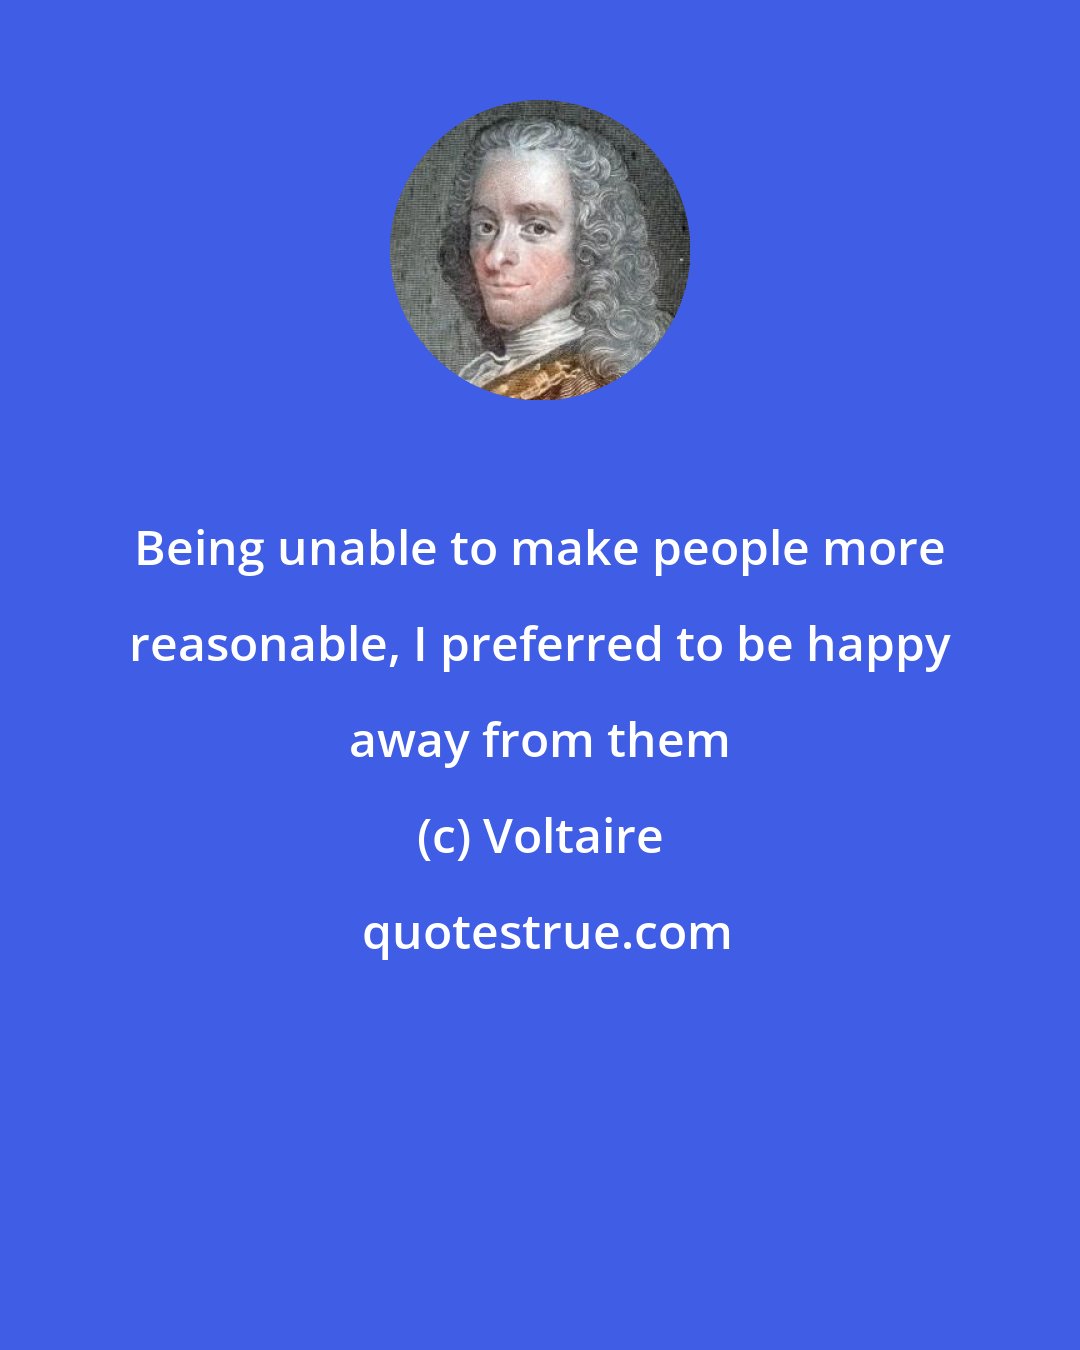 Voltaire: Being unable to make people more reasonable, I preferred to be happy away from them